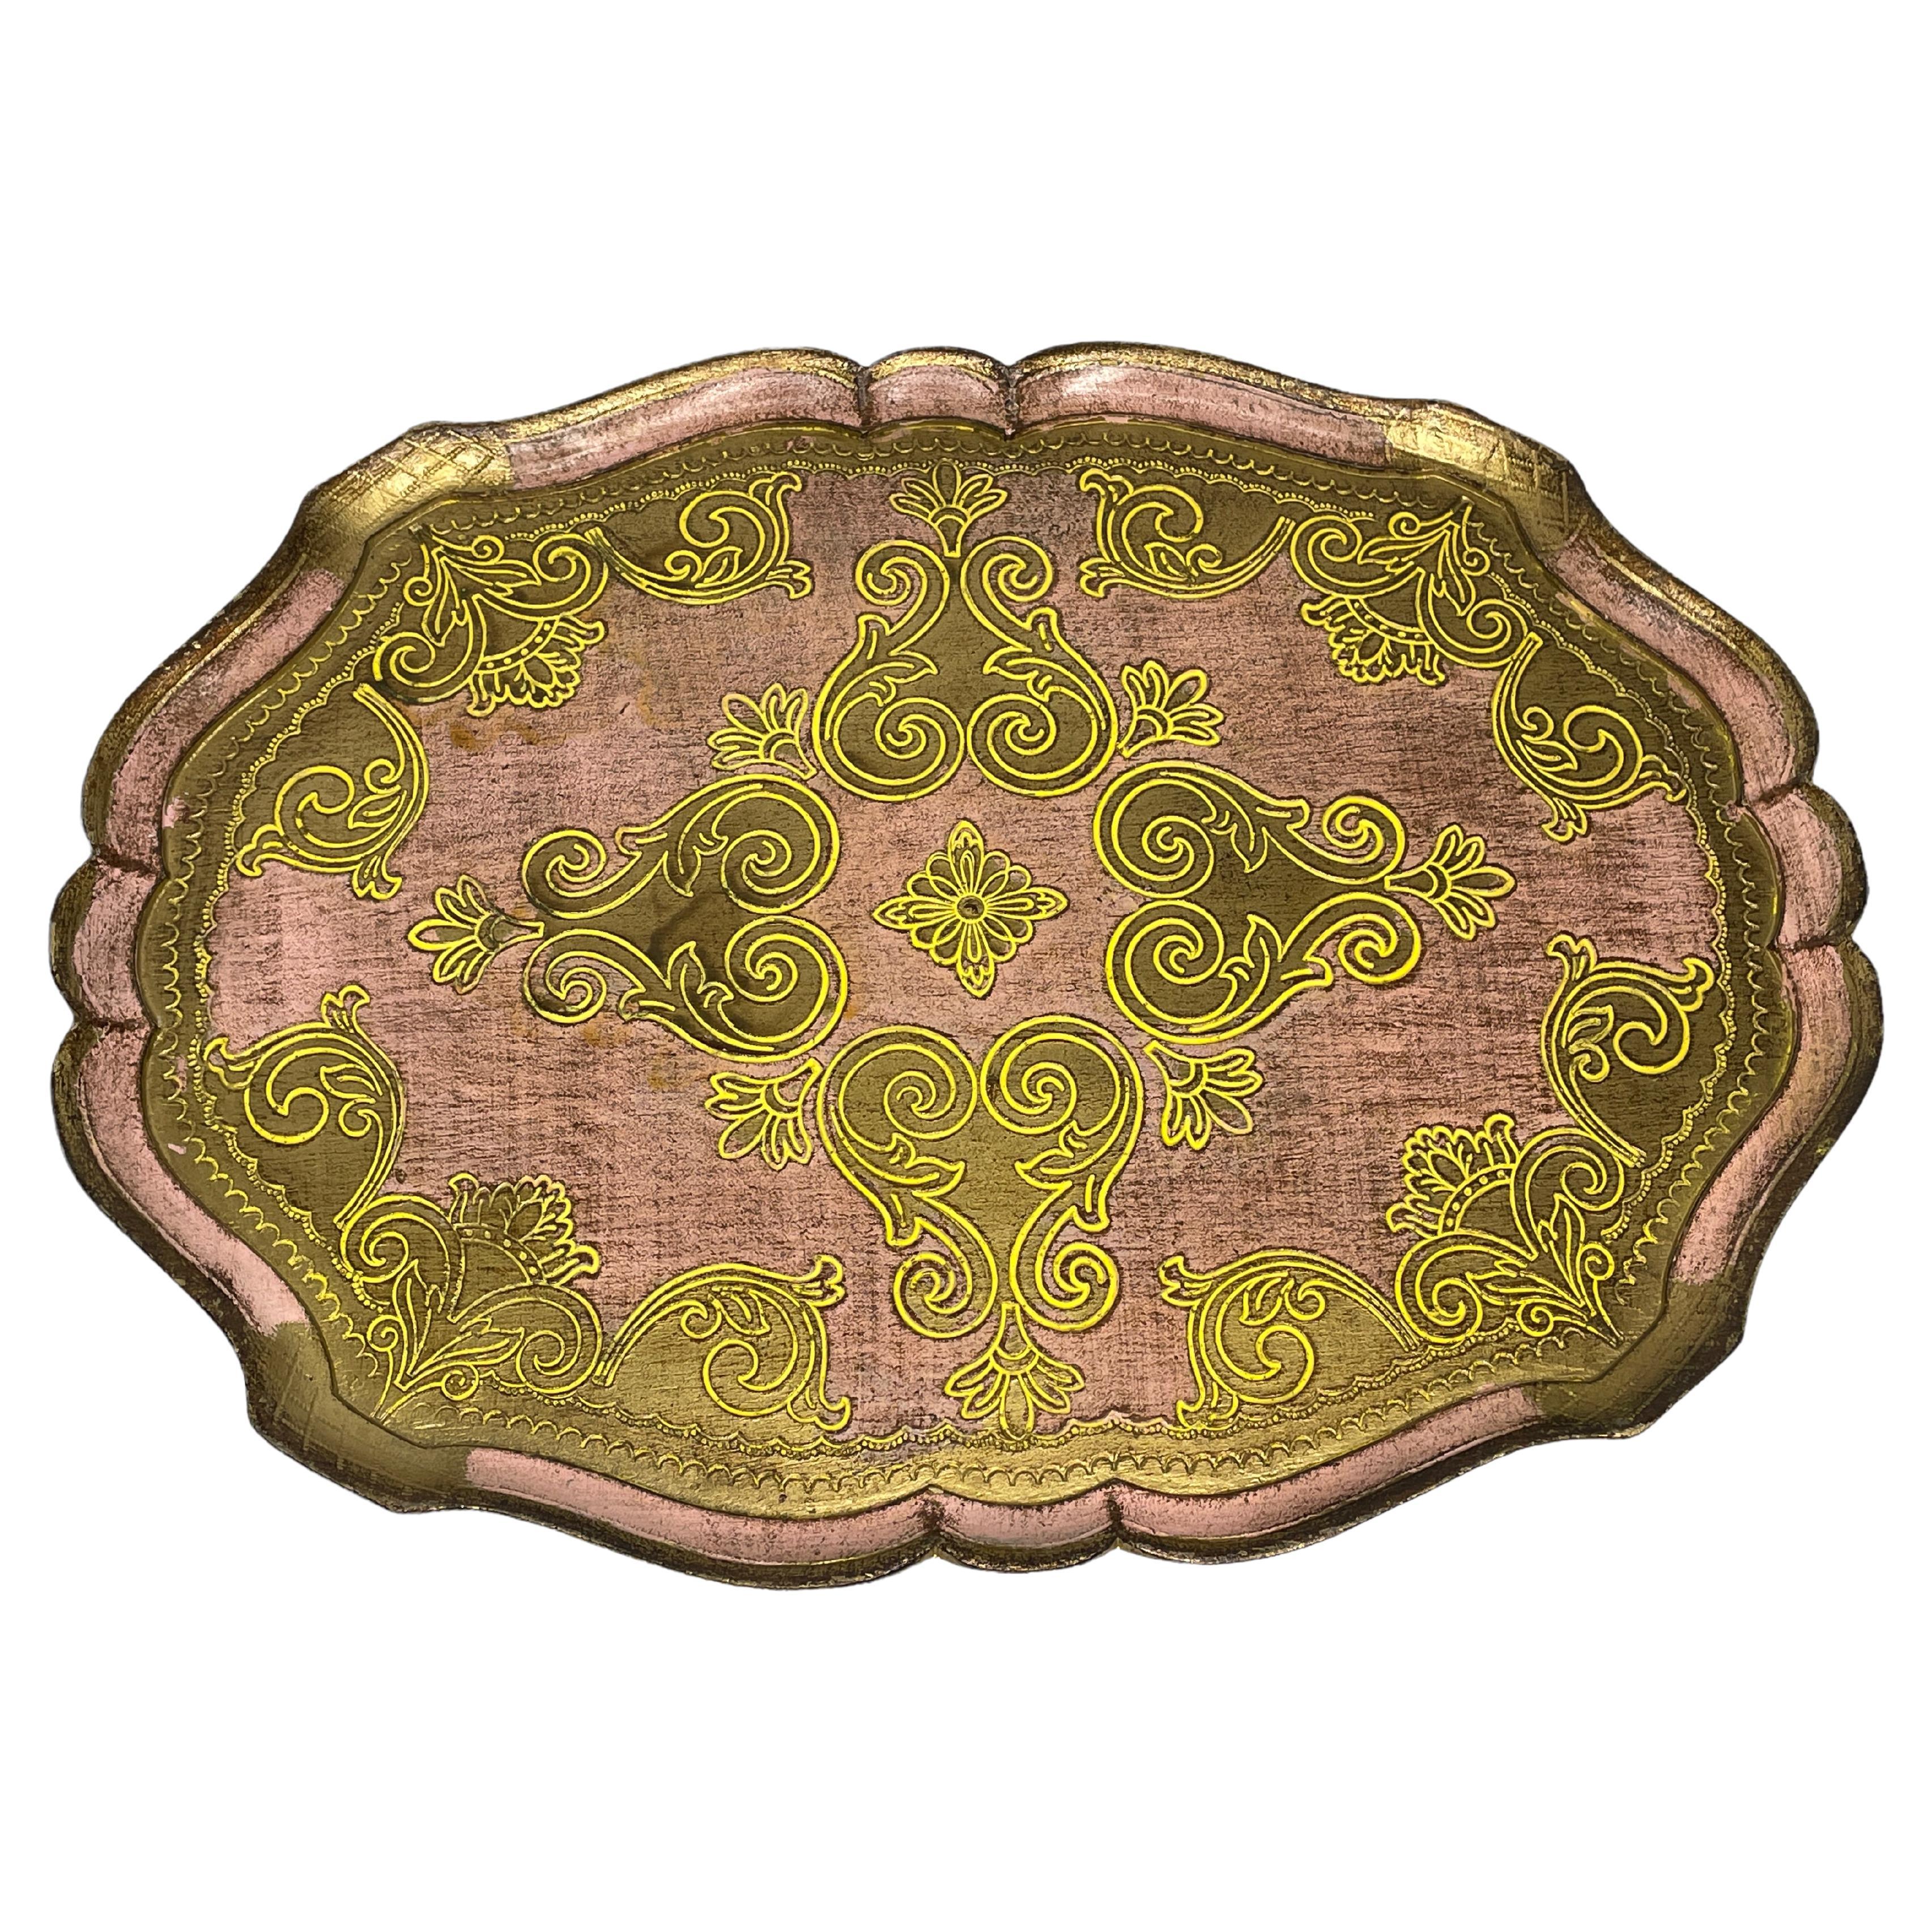 Stunning Italian Florentine Gilded Gilt Wood Serving Tray Toleware Tole, 1960s For Sale